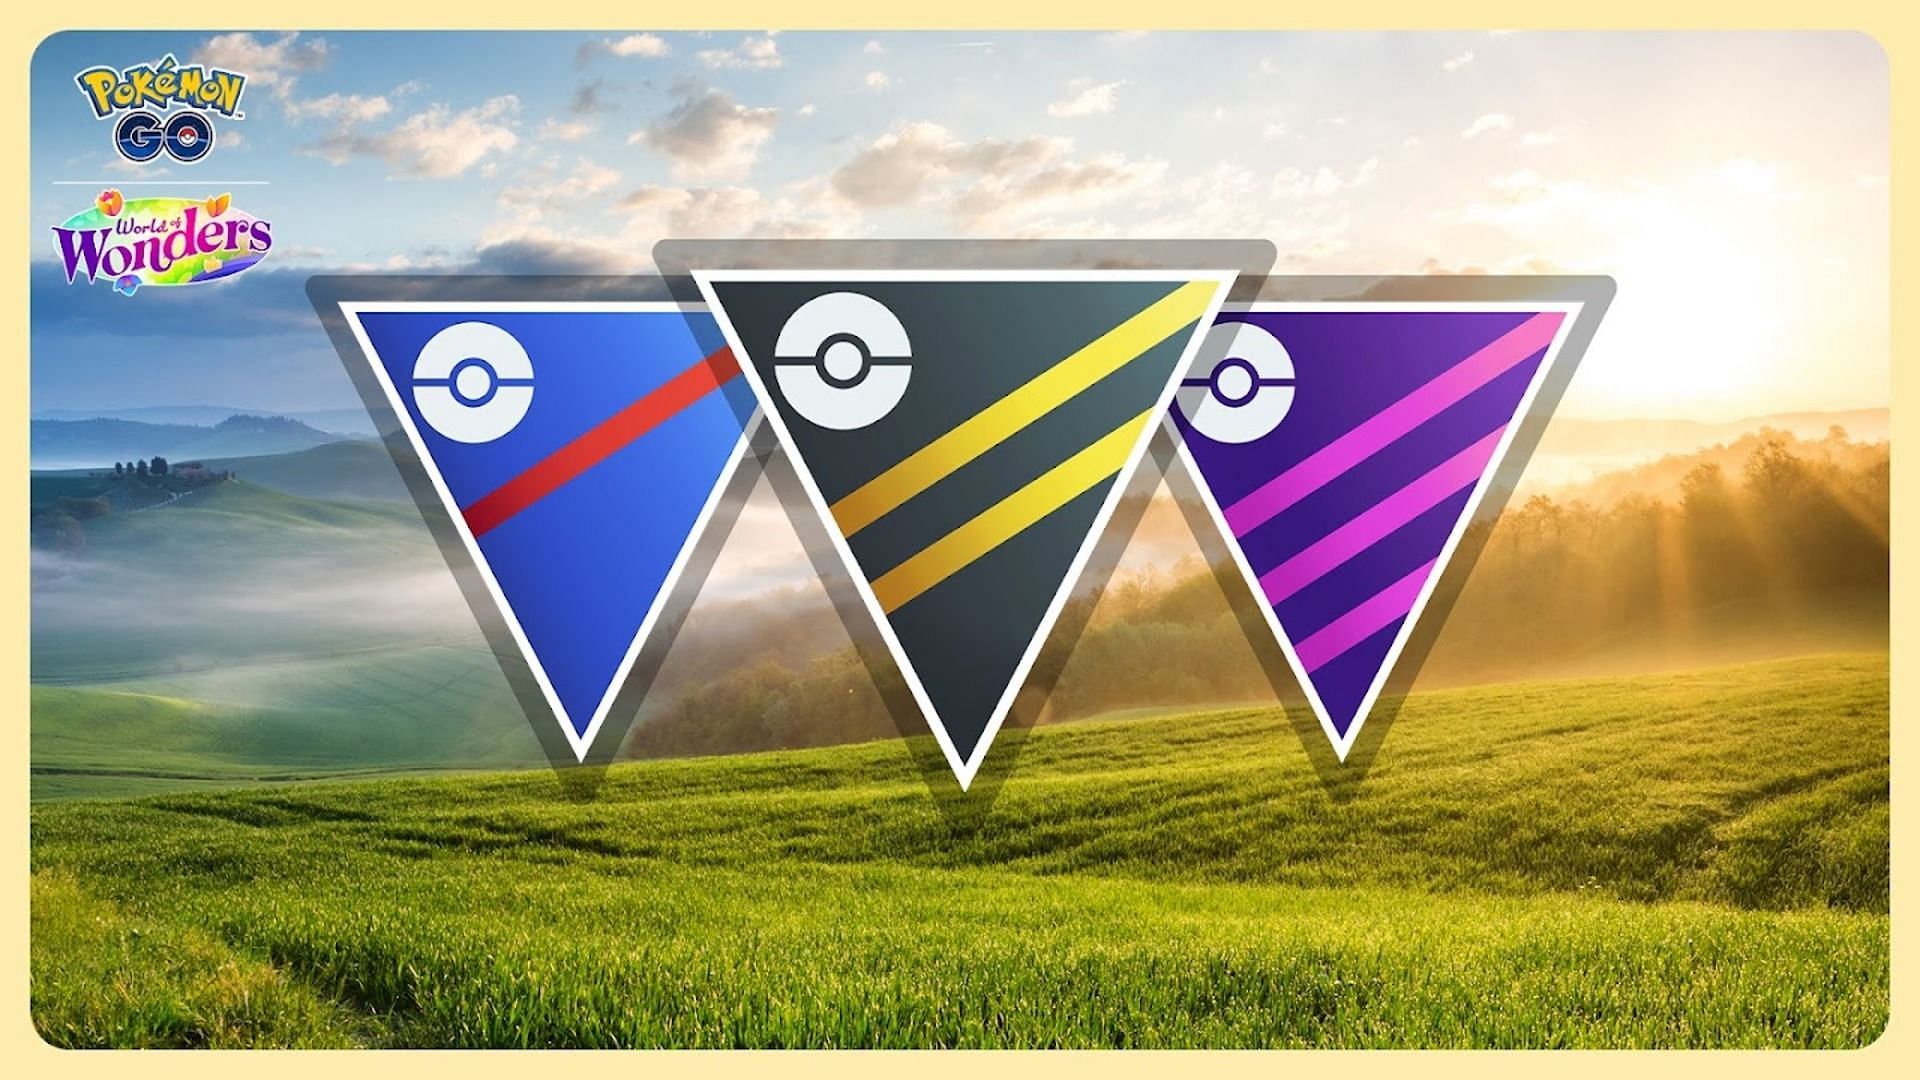 Battle Days sadly have very little value as they only grant bonuses (Image via Niantic)